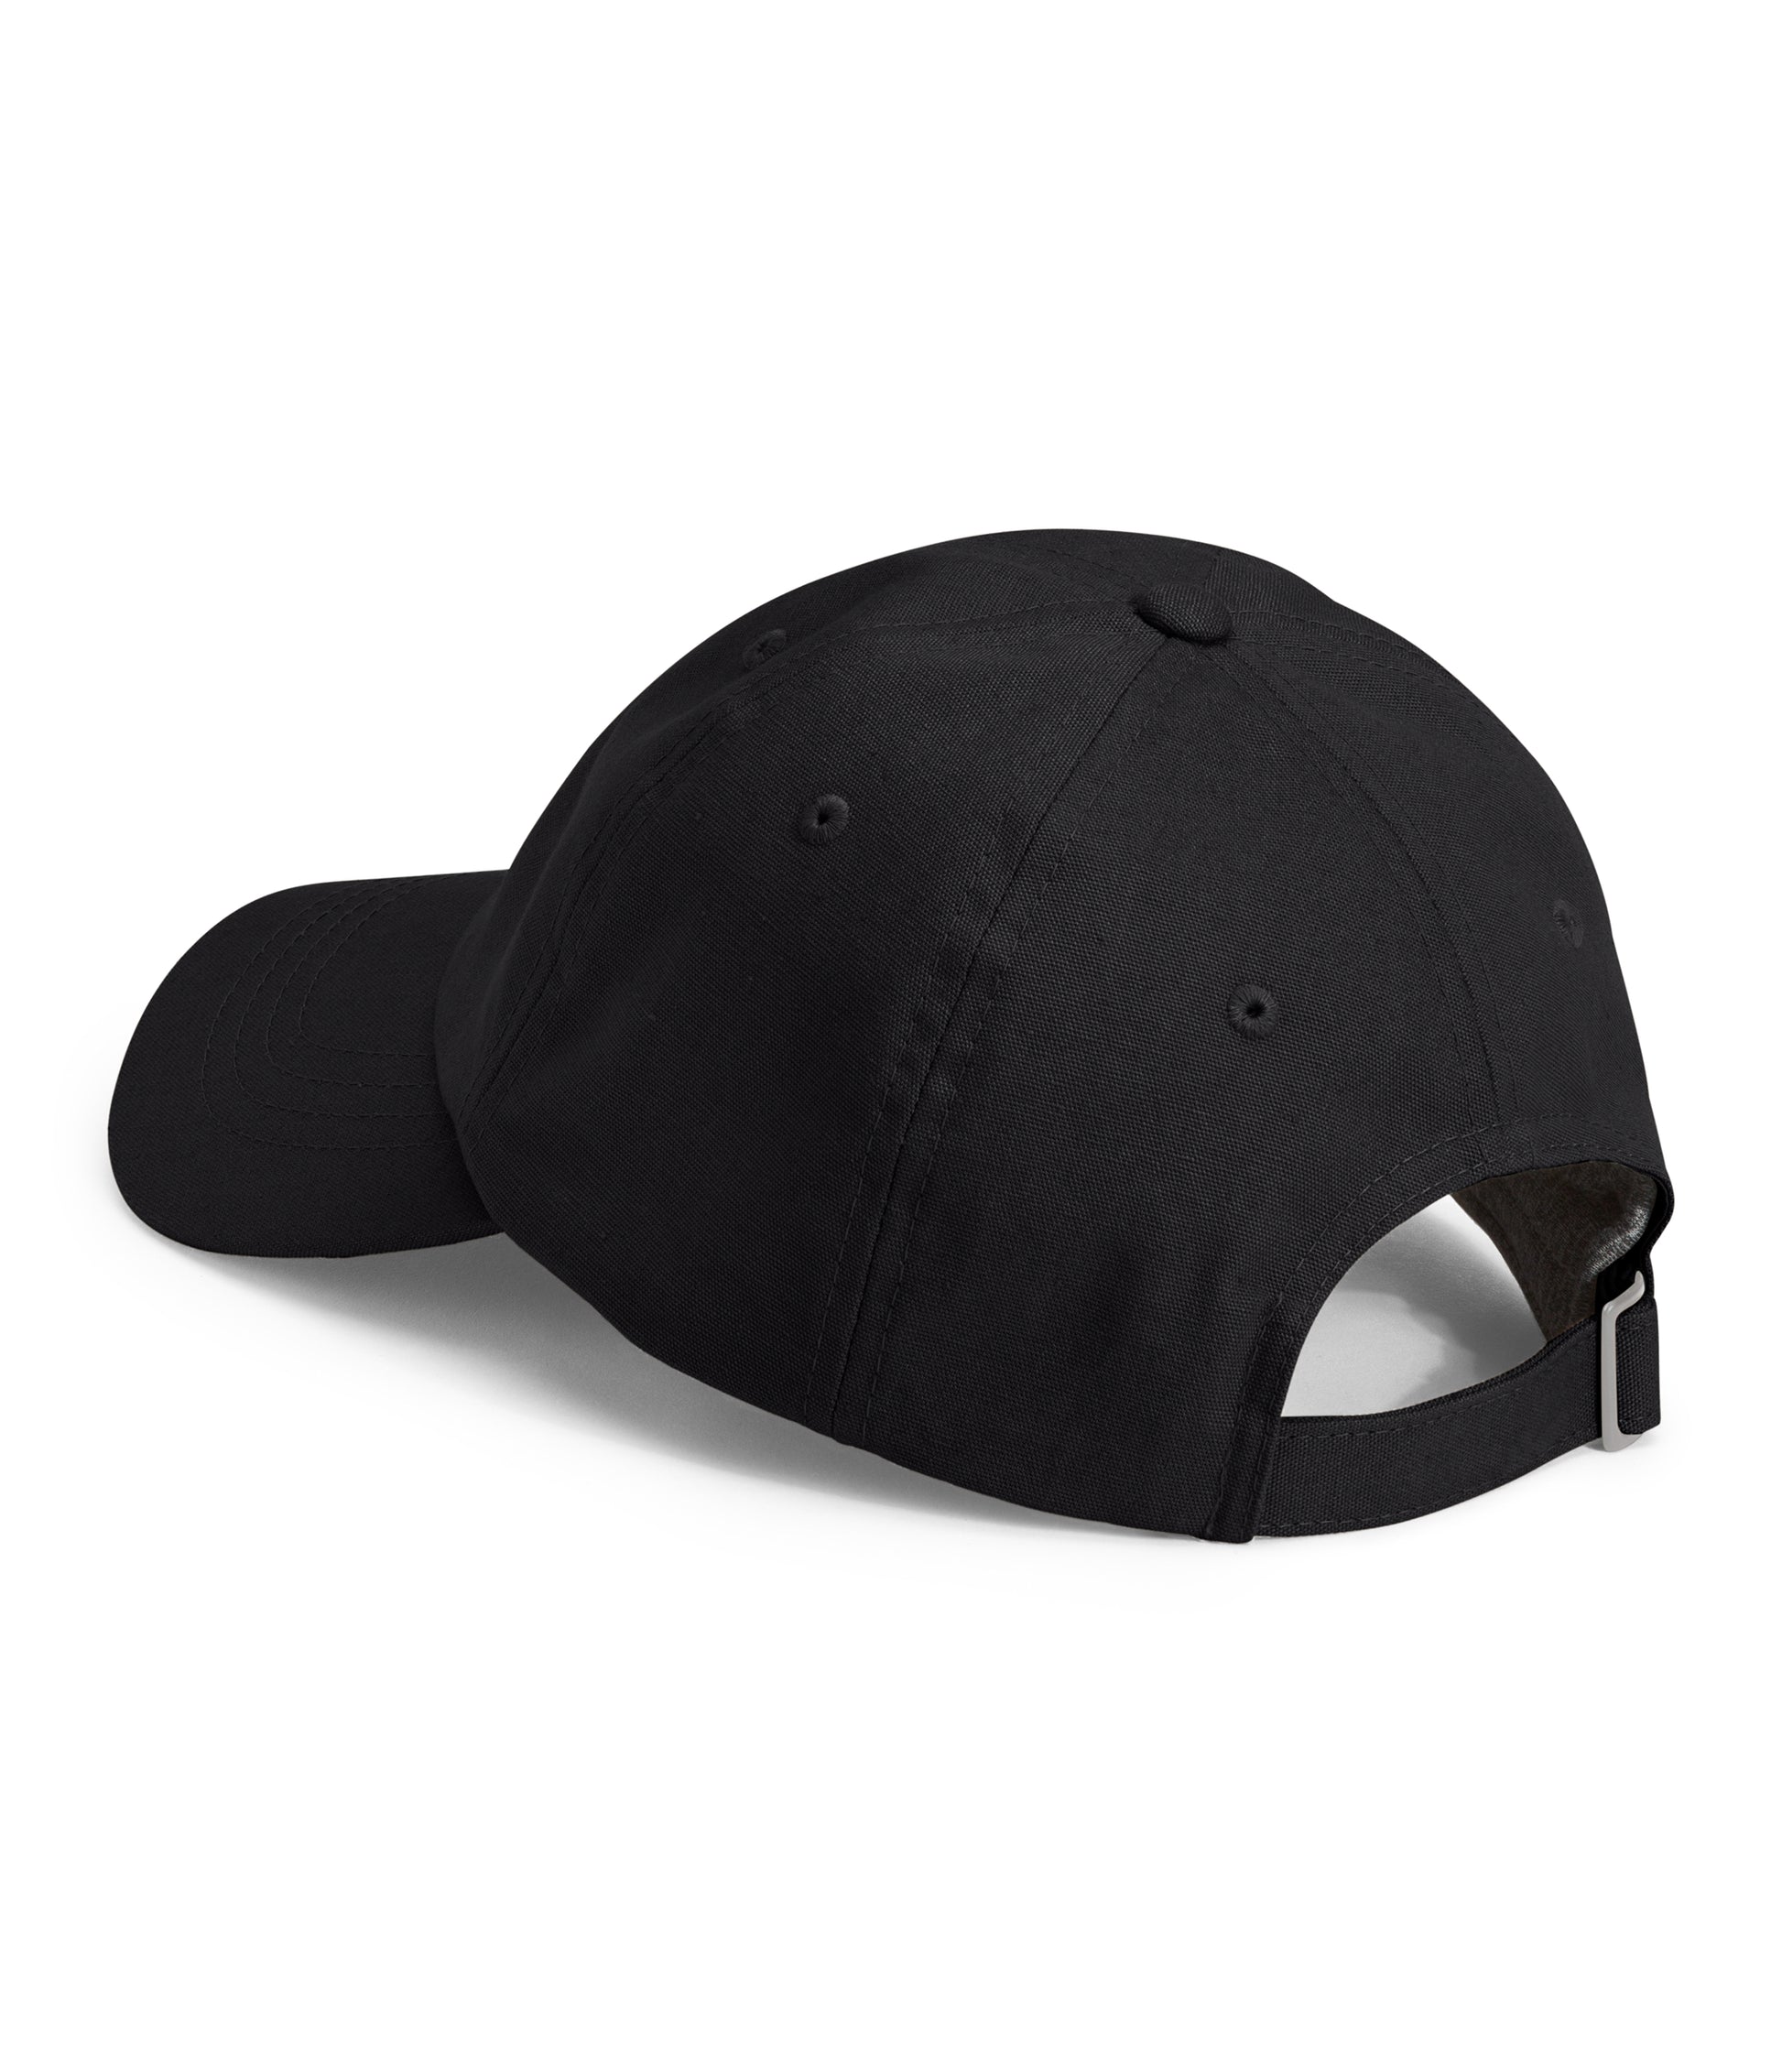 Gorra The North Face Color Negro